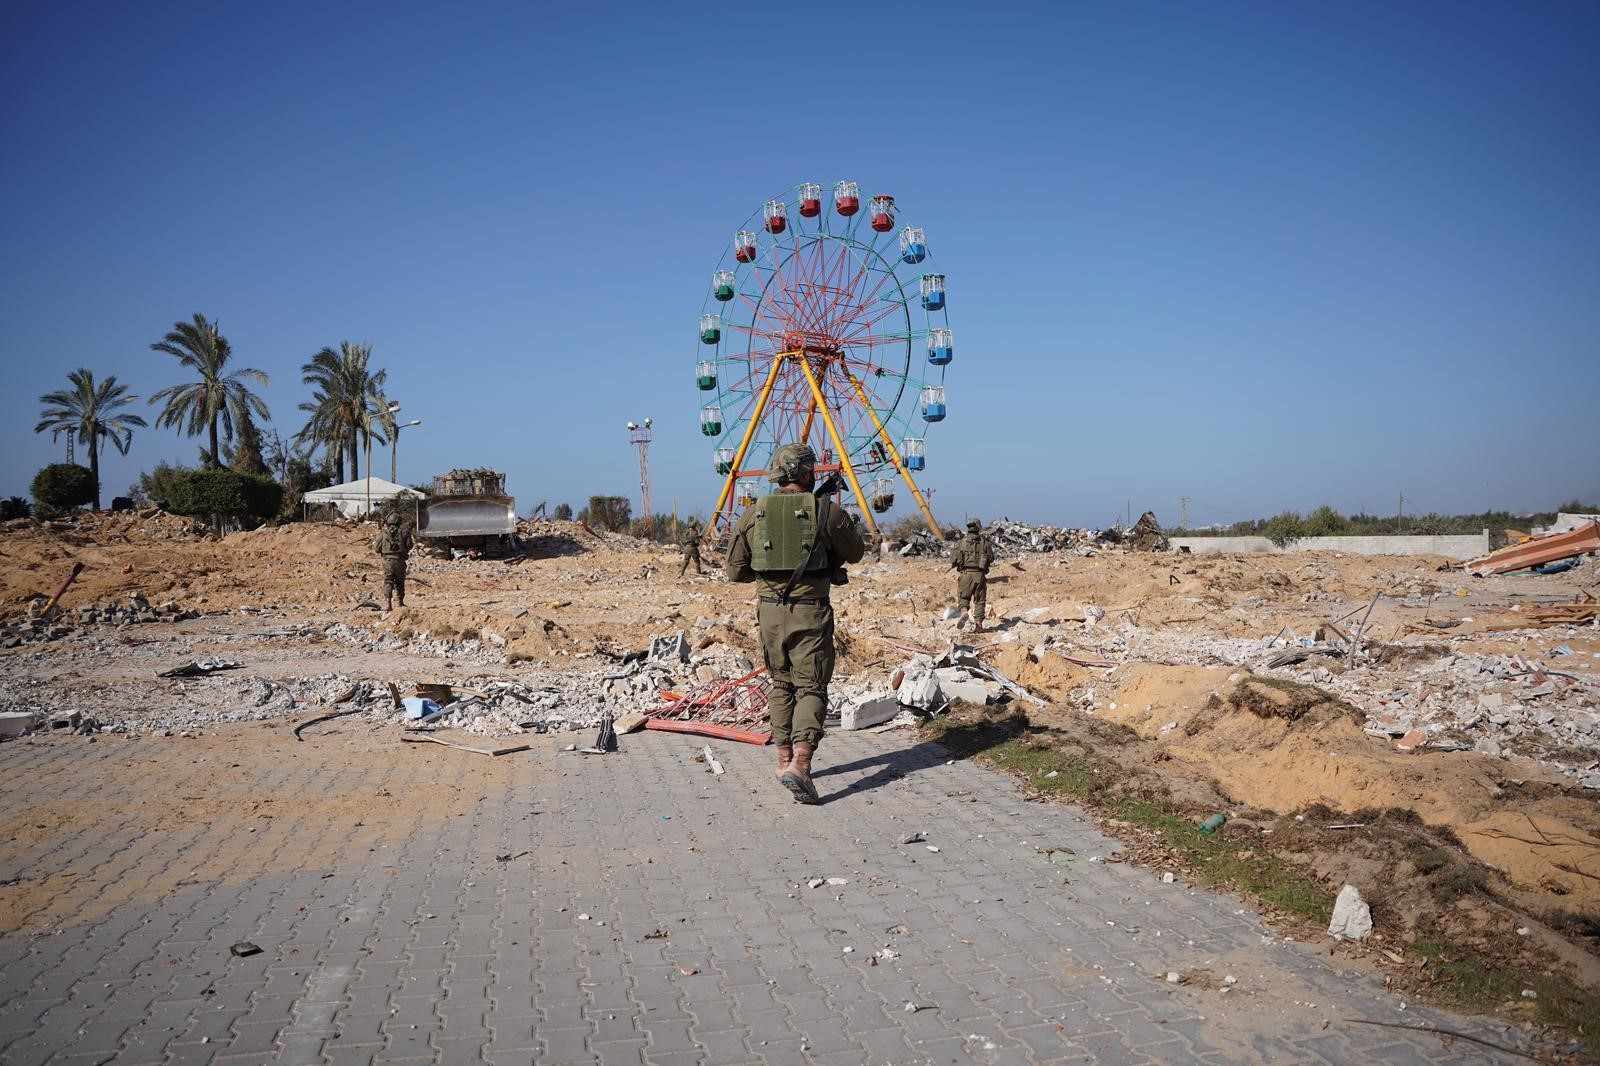 A soldier standing in an arid area, with a ferris wheel in the distance